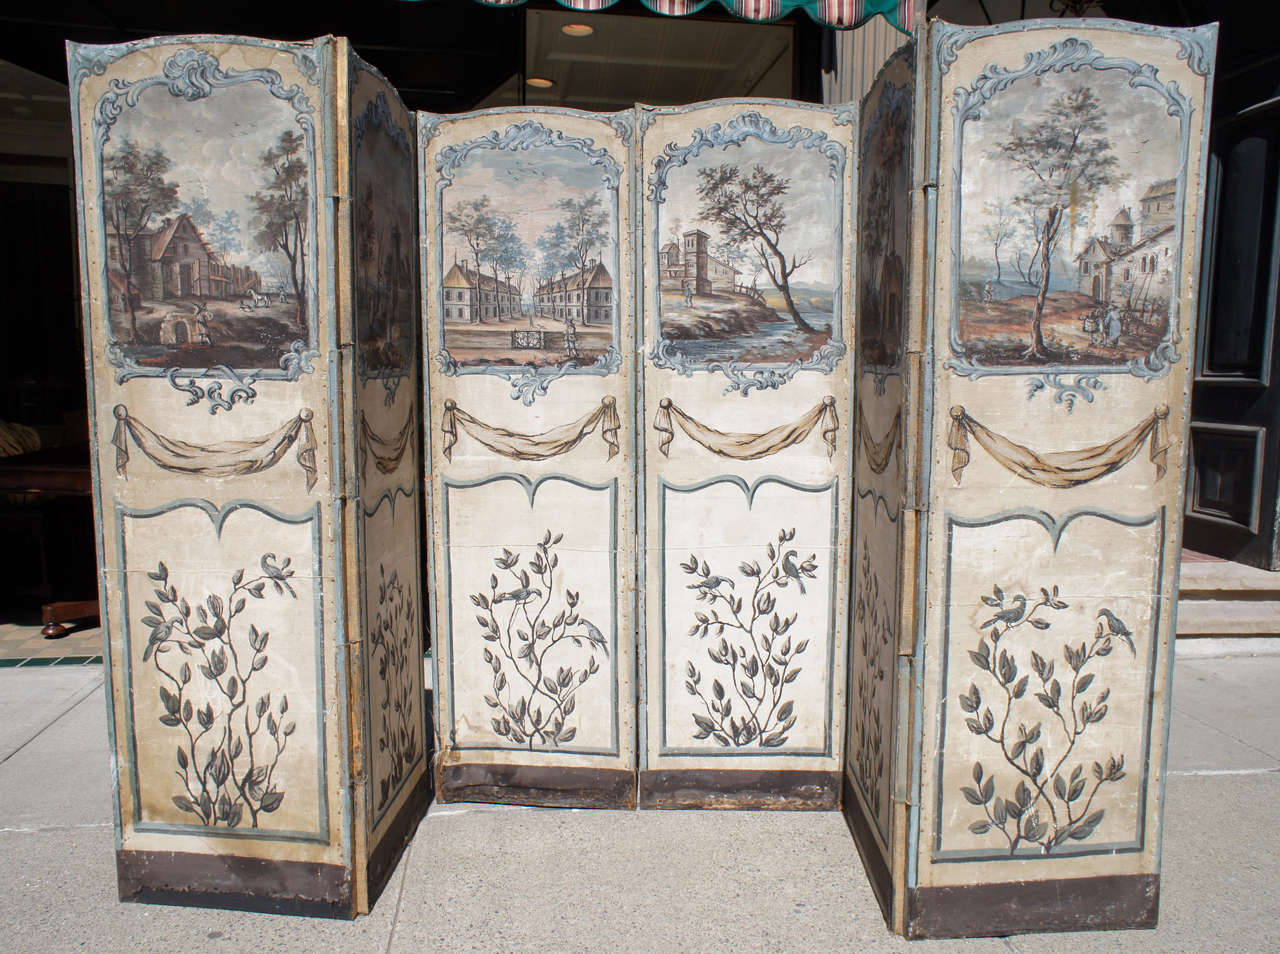 This lovely and unusually large 6 panel French screen is painted in a late 18th century style and manner. The scenes depicting various buildings , people and bucolic settings are further enhanced with  draped swags and floral specimens. These are